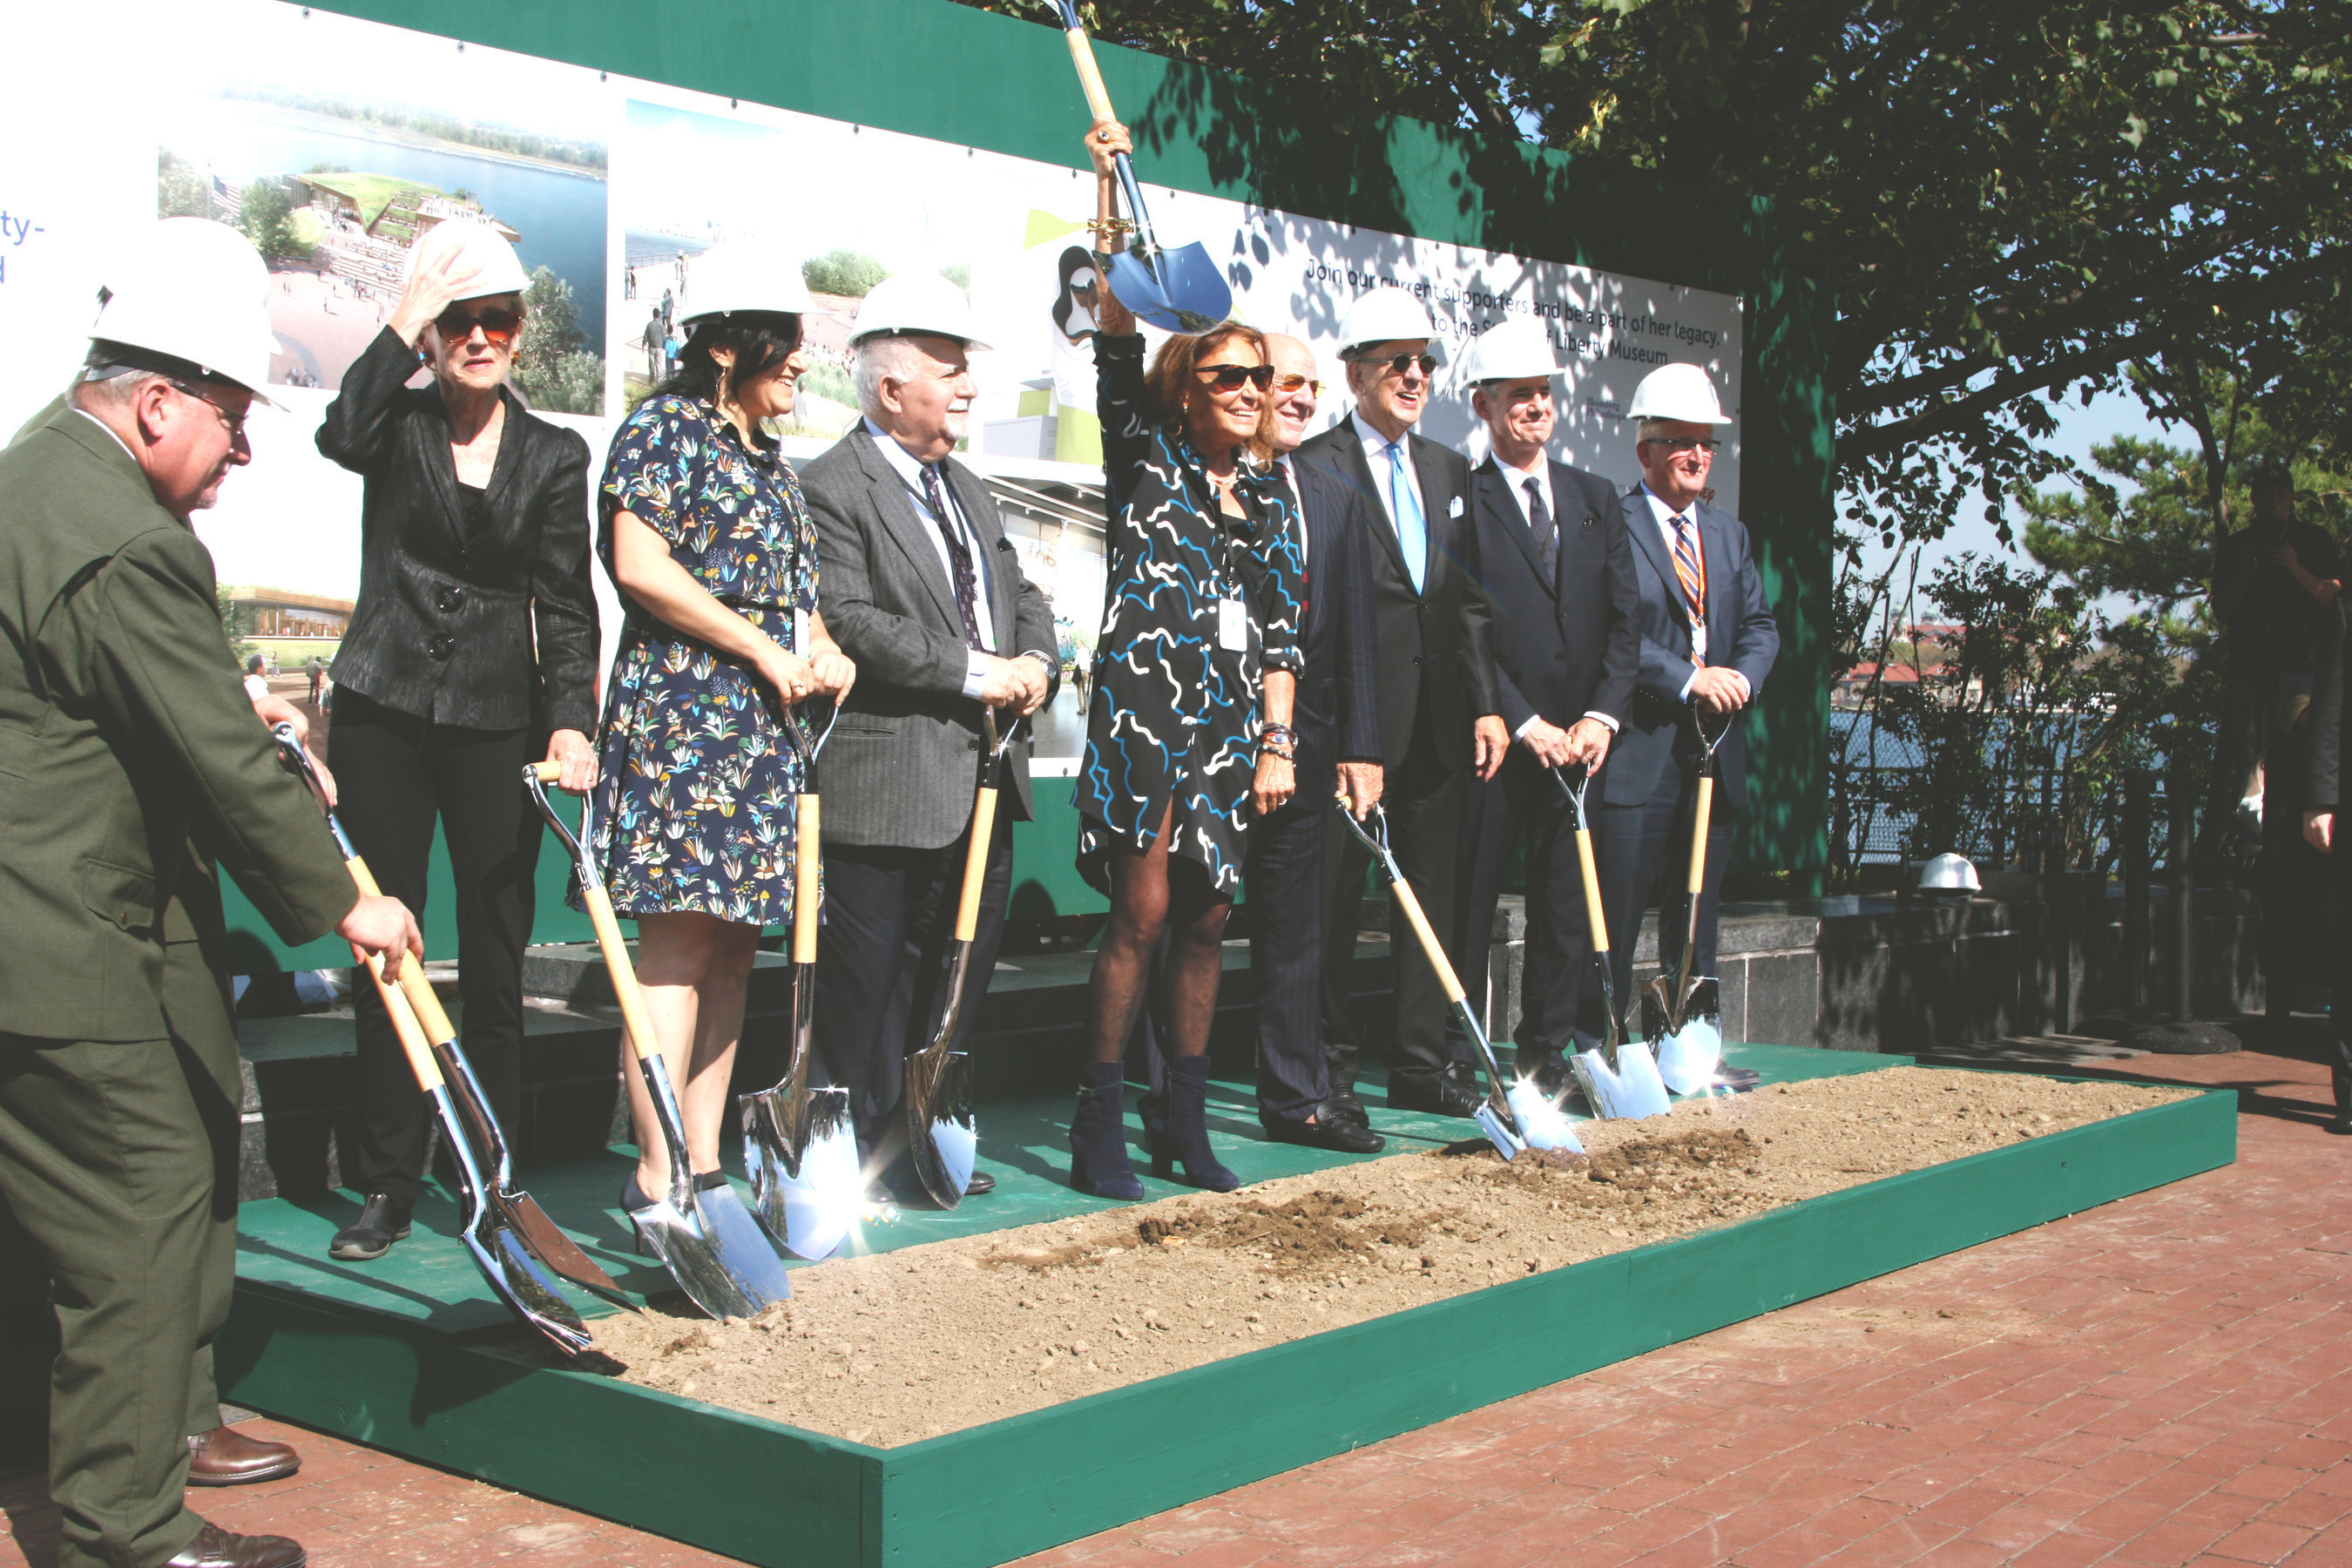 Doug Phelps, president of Phelps Construction Group, joined Diane von Furstenberg and members of the Statue of Liberty-Ellis Island Foundation, Inc. in a groundbreaking ceremony on Thursday, October 6 for the new 26,000 square foot Statue of Liberty Museum on Liberty Island in the New York Harbor.